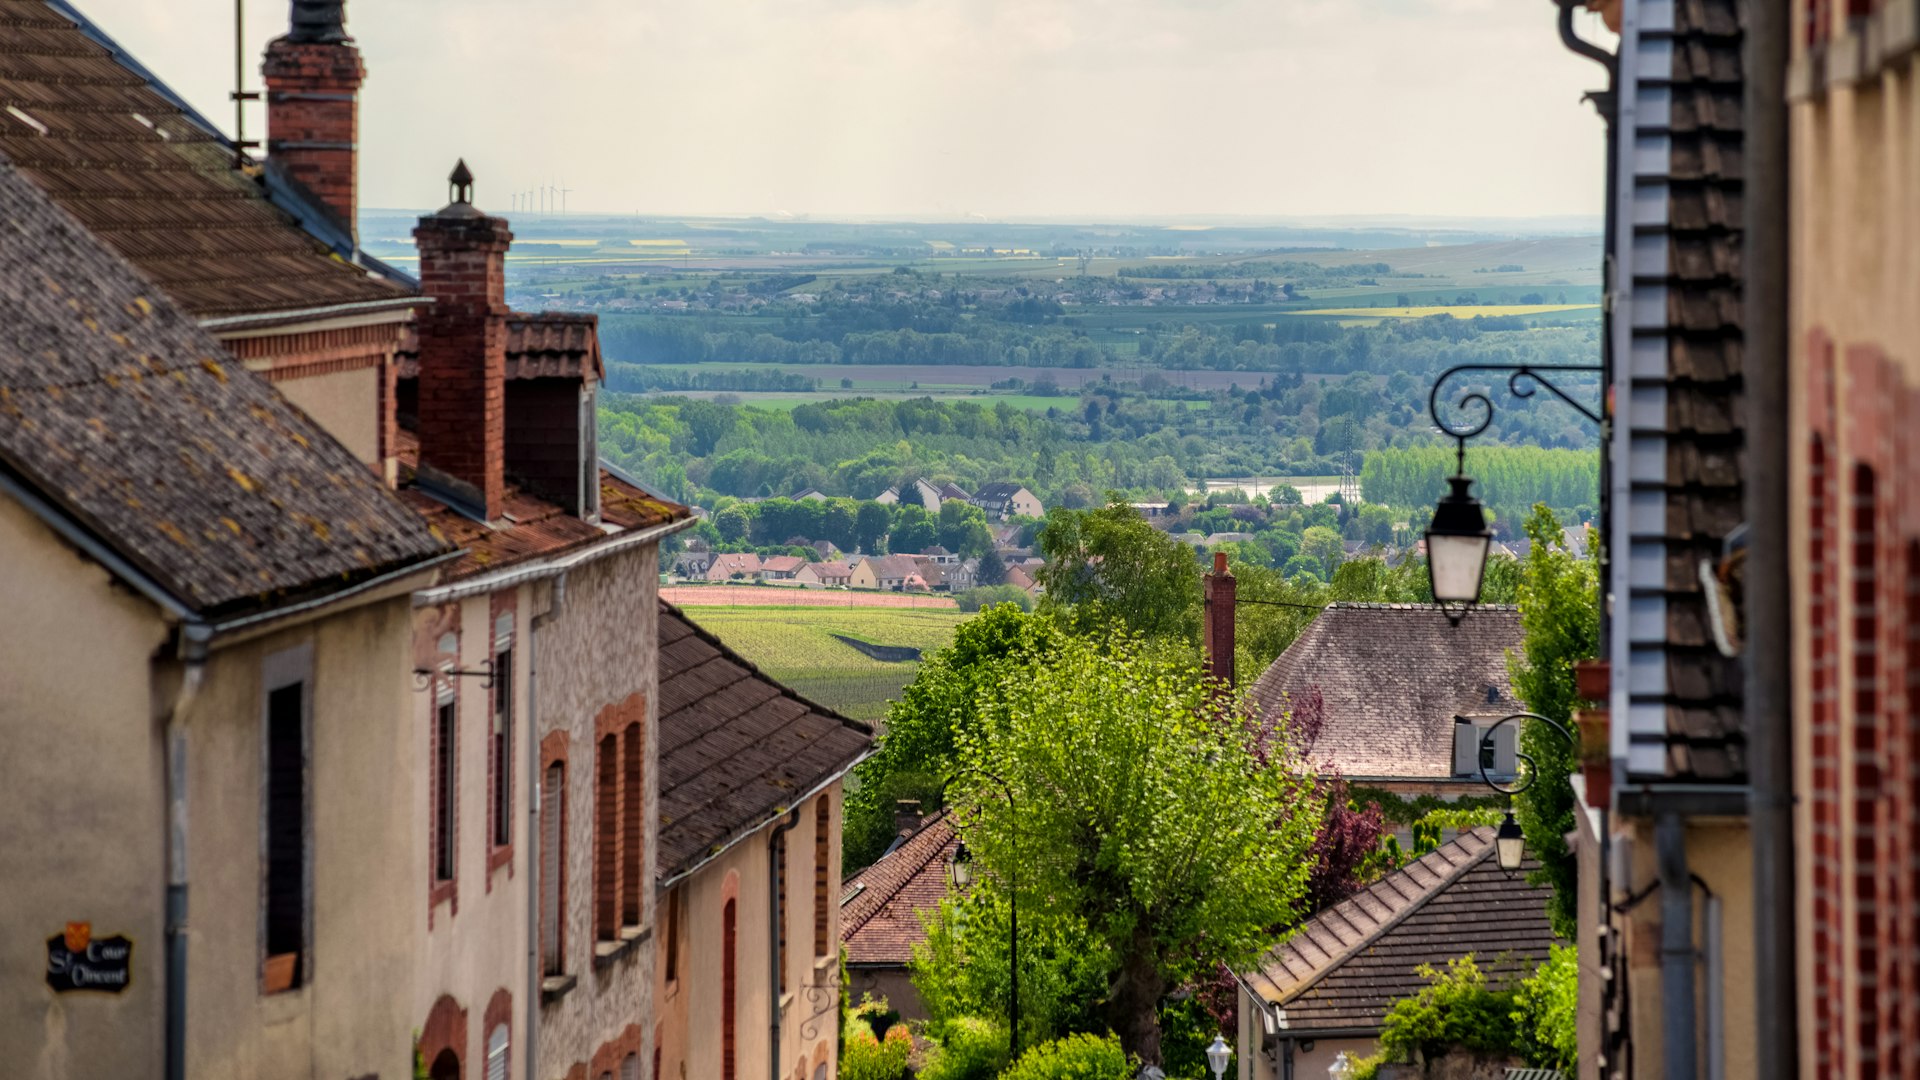 Brown roofs and buildings of Hautvillers, in the Champagne region of France, looking out on vineyards and hills